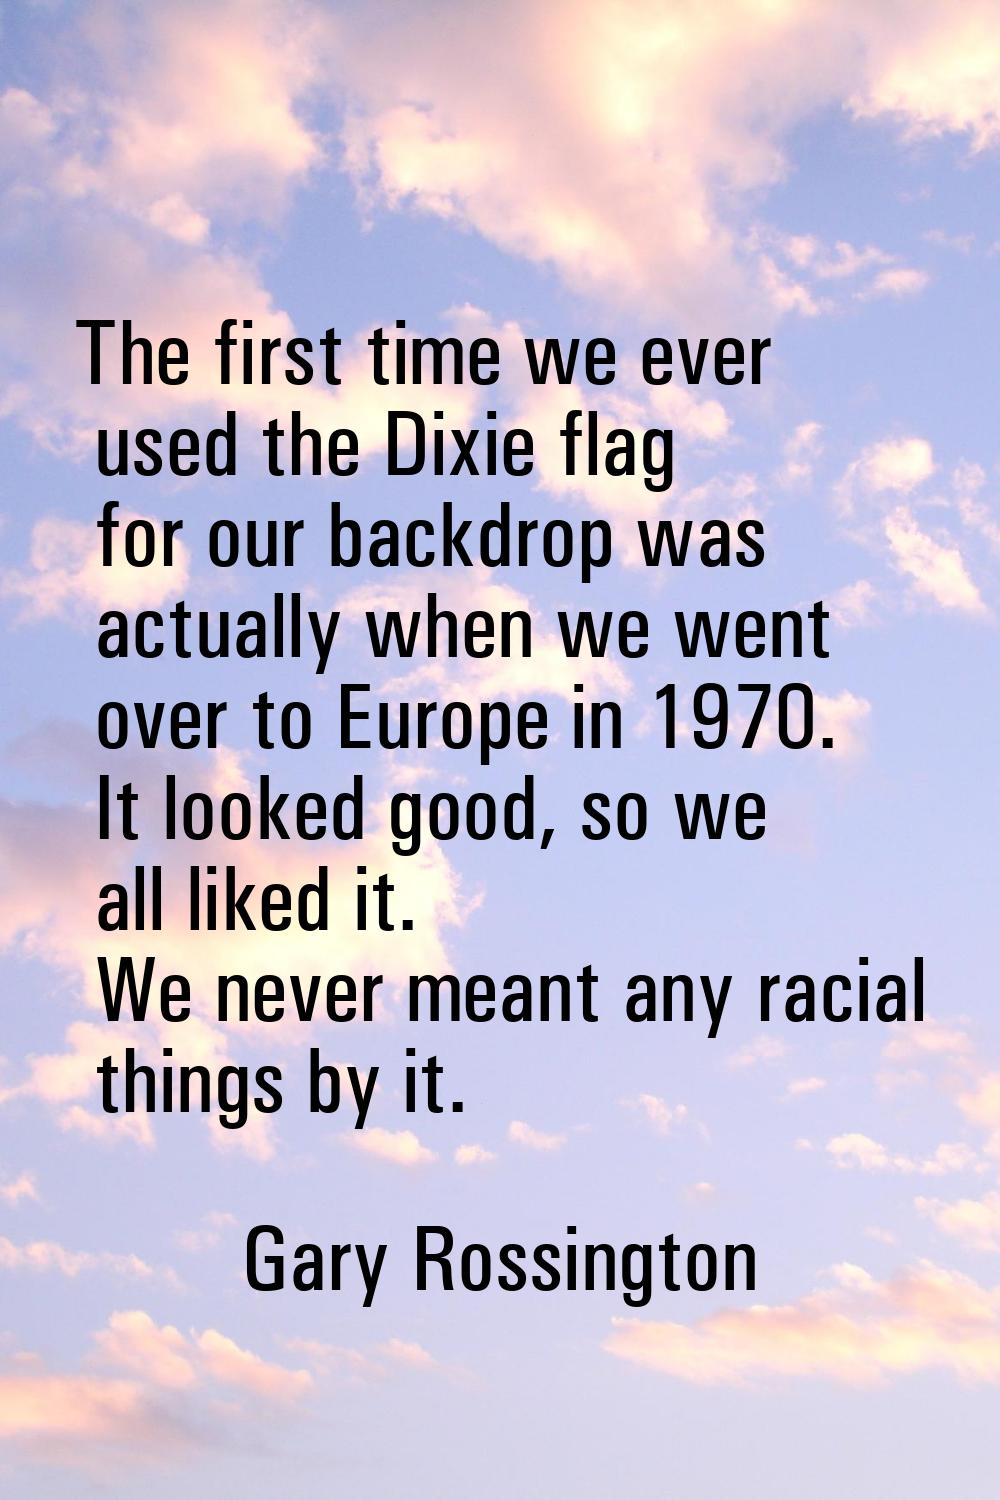 The first time we ever used the Dixie flag for our backdrop was actually when we went over to Europ